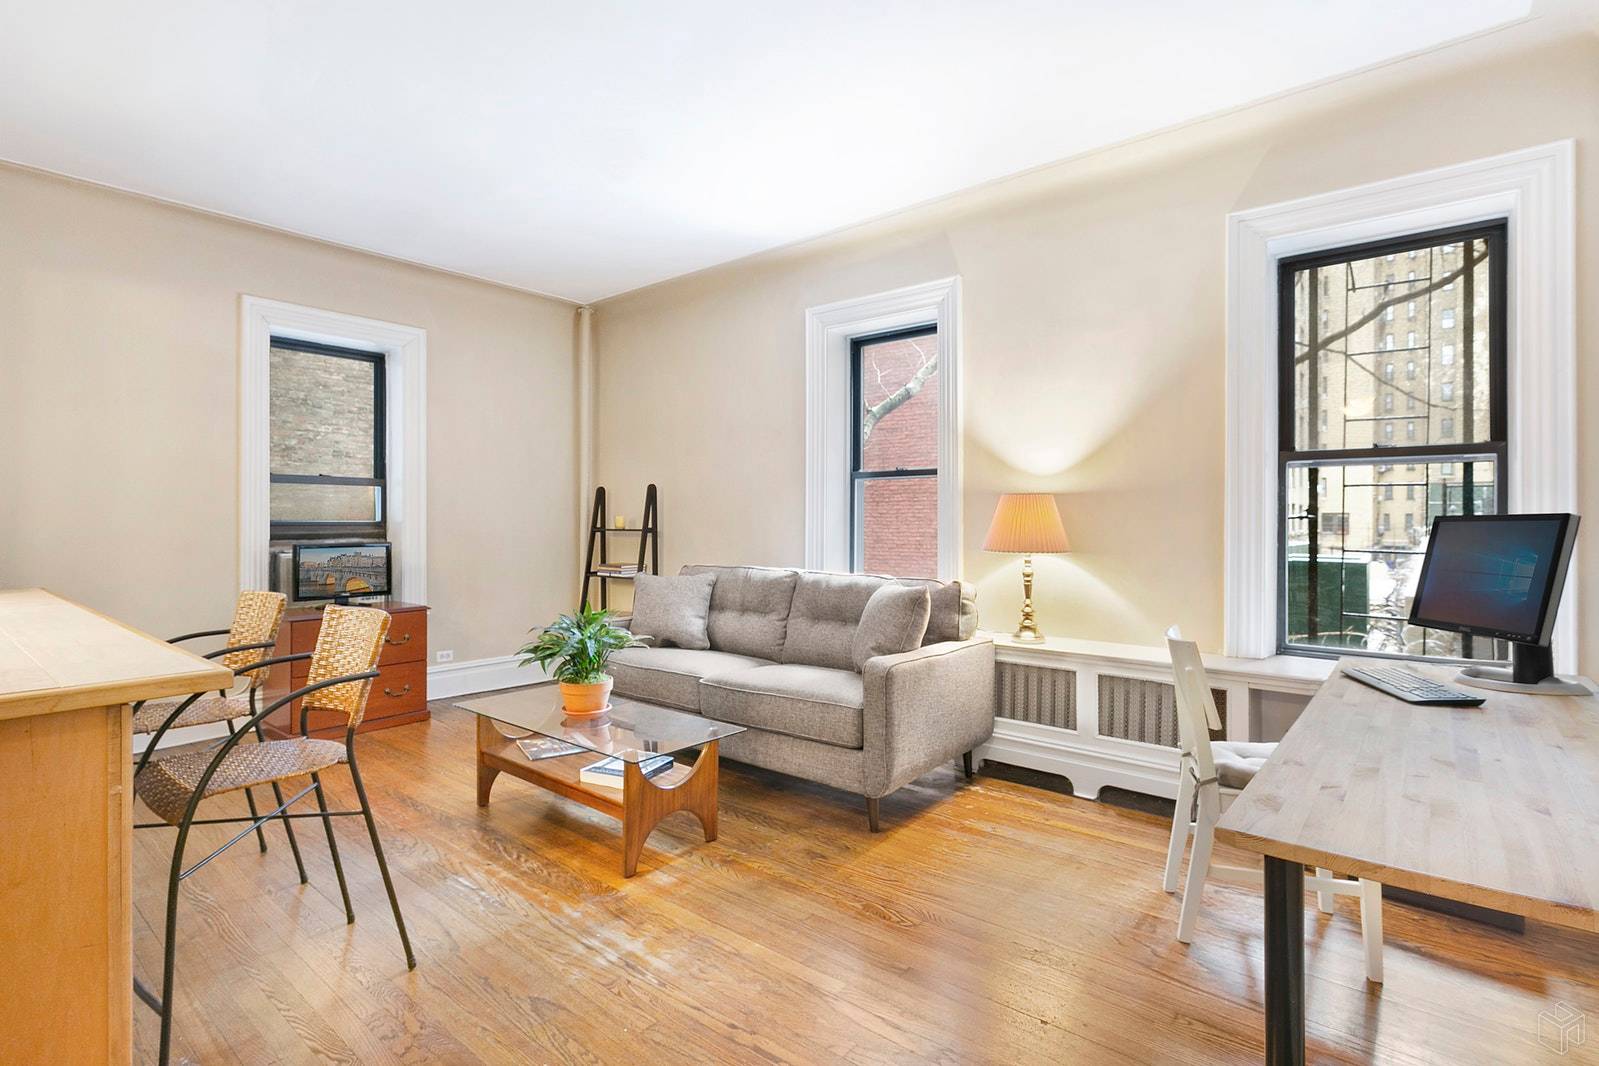 Beautifully situated in an elegant Full service Doorman cooperative with an enviable Madison Avenue, just one block from Central Park and the beginnings of Museum mile and all the treasured ...